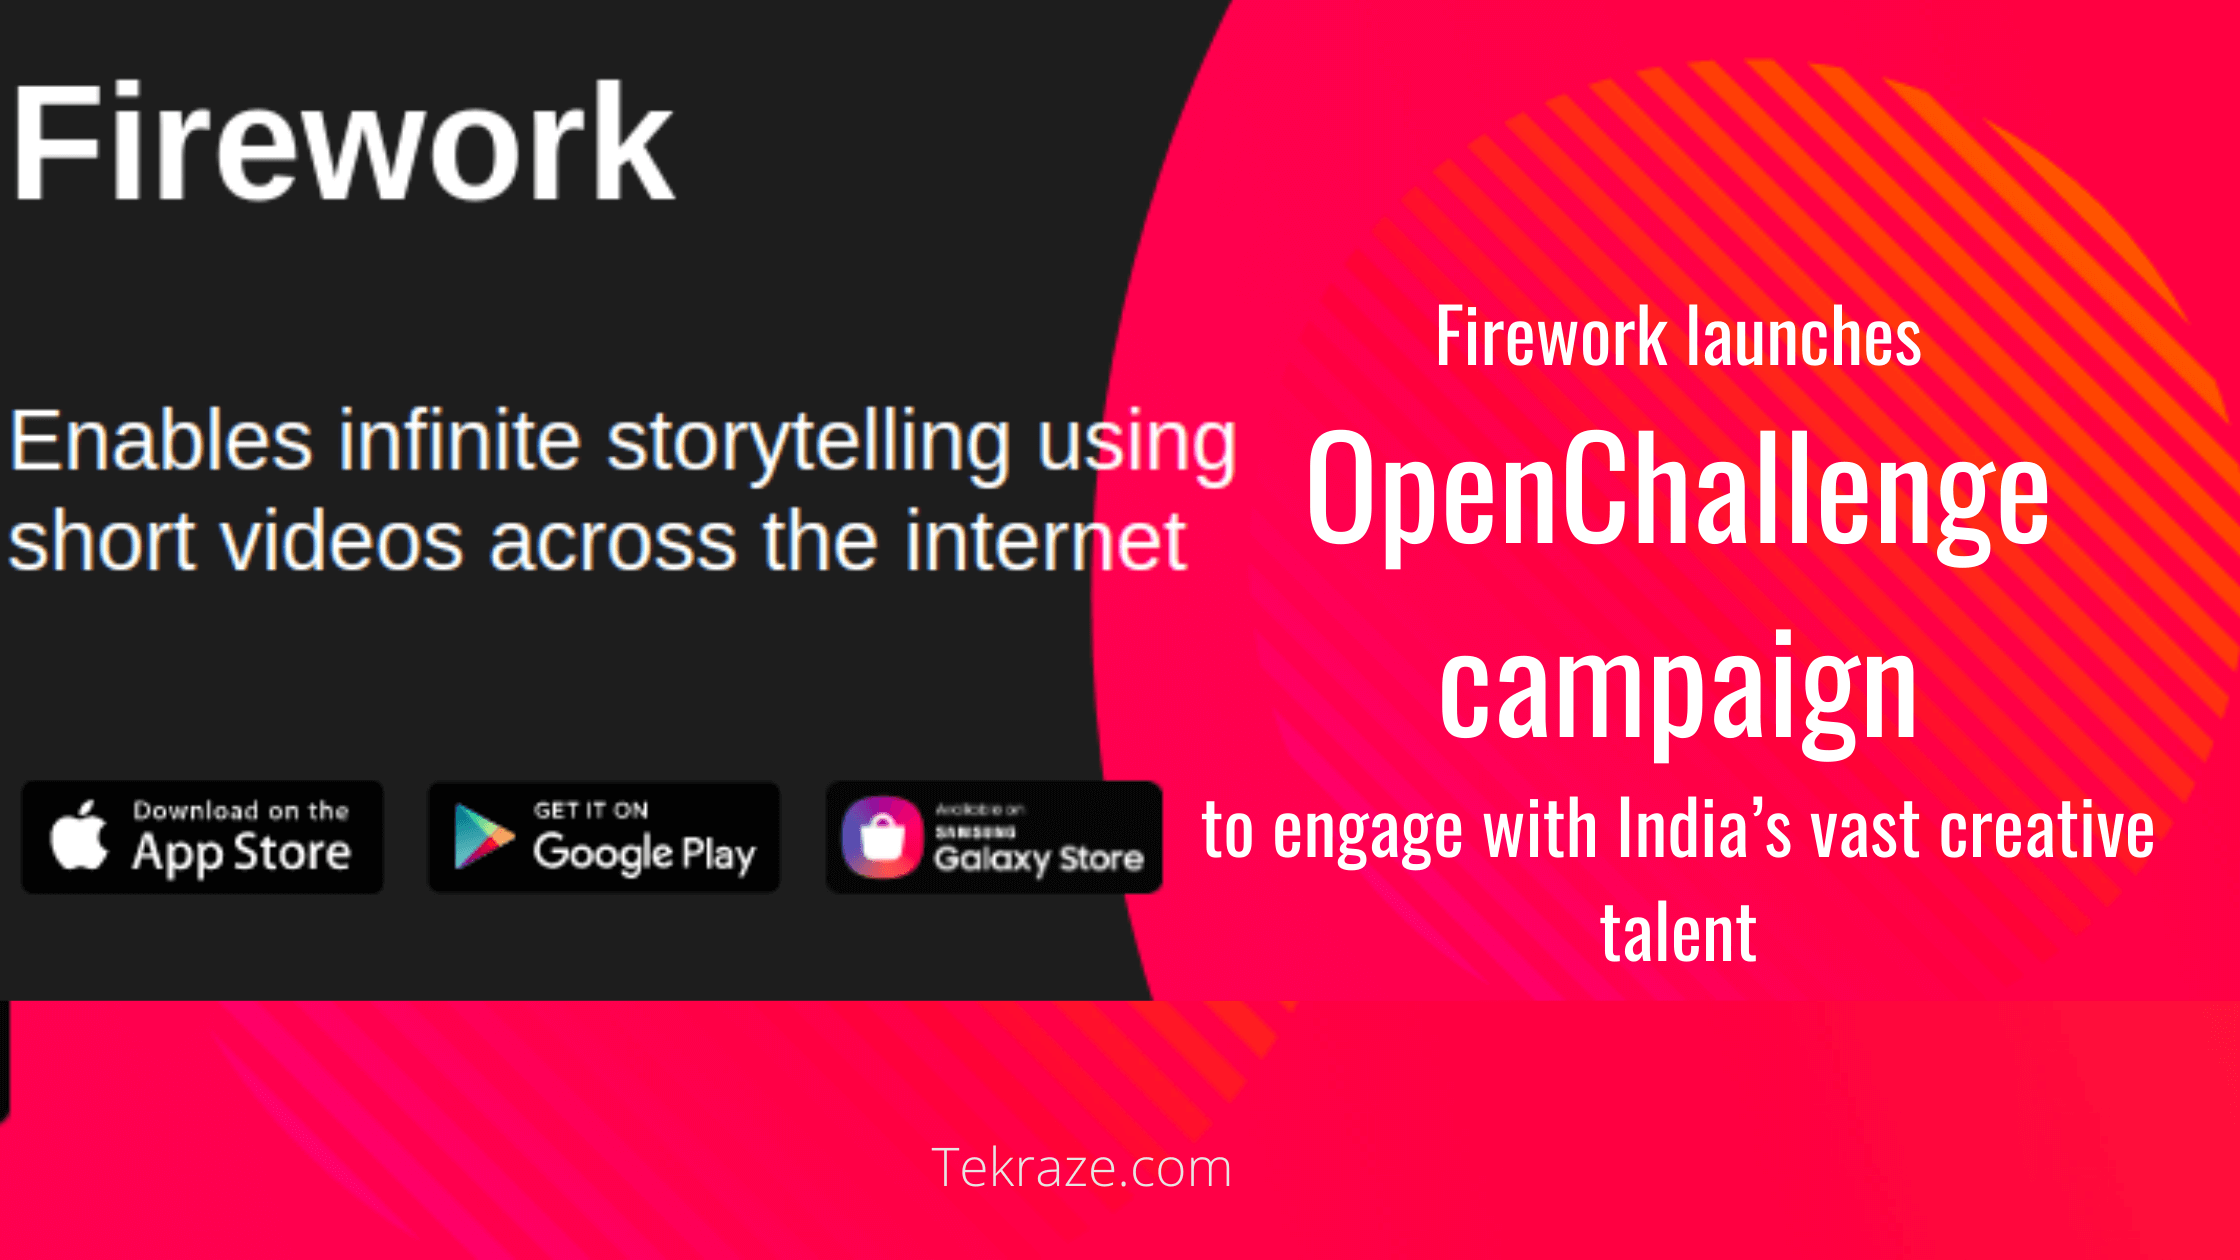 Firework Launches OpenChallenge Campaign